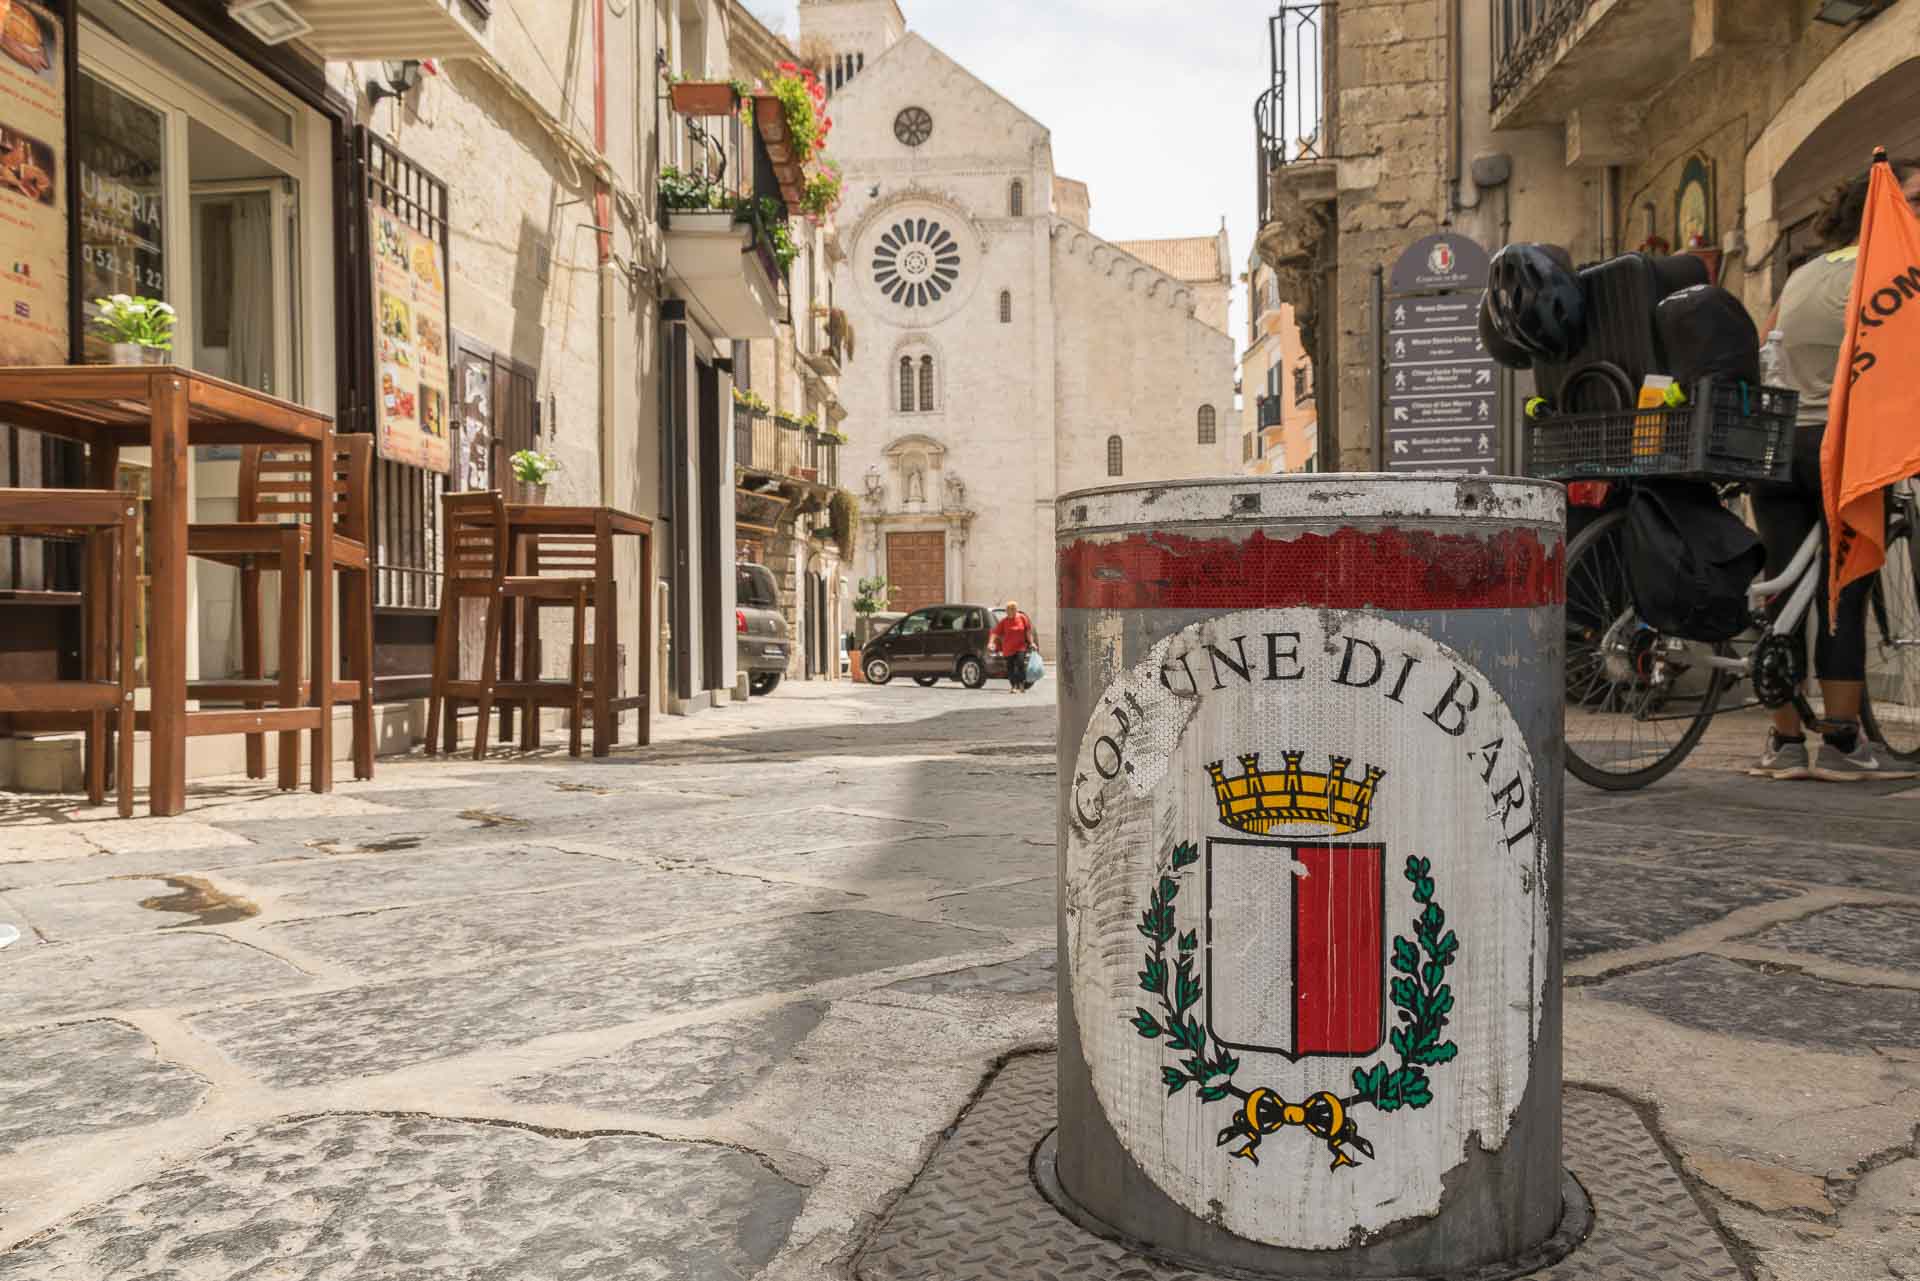 One of the streets of Bari with a comune sign